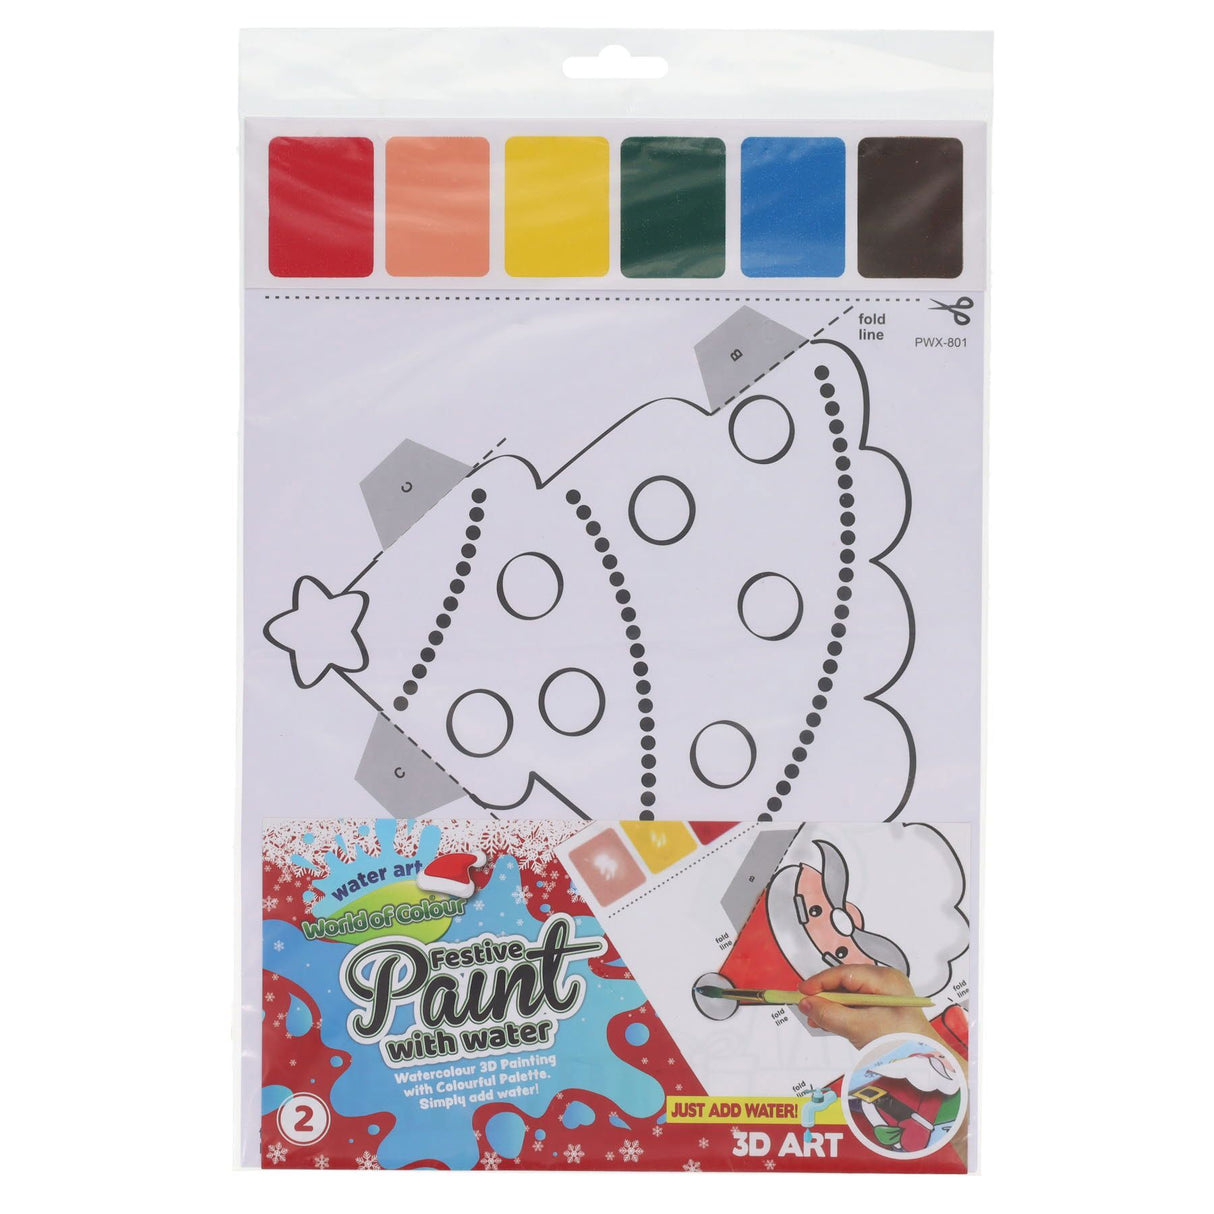 World of Colour Water Art - Paint with Water - Palette on Page - 2 Sheets - Festive | Stationery Shop UK